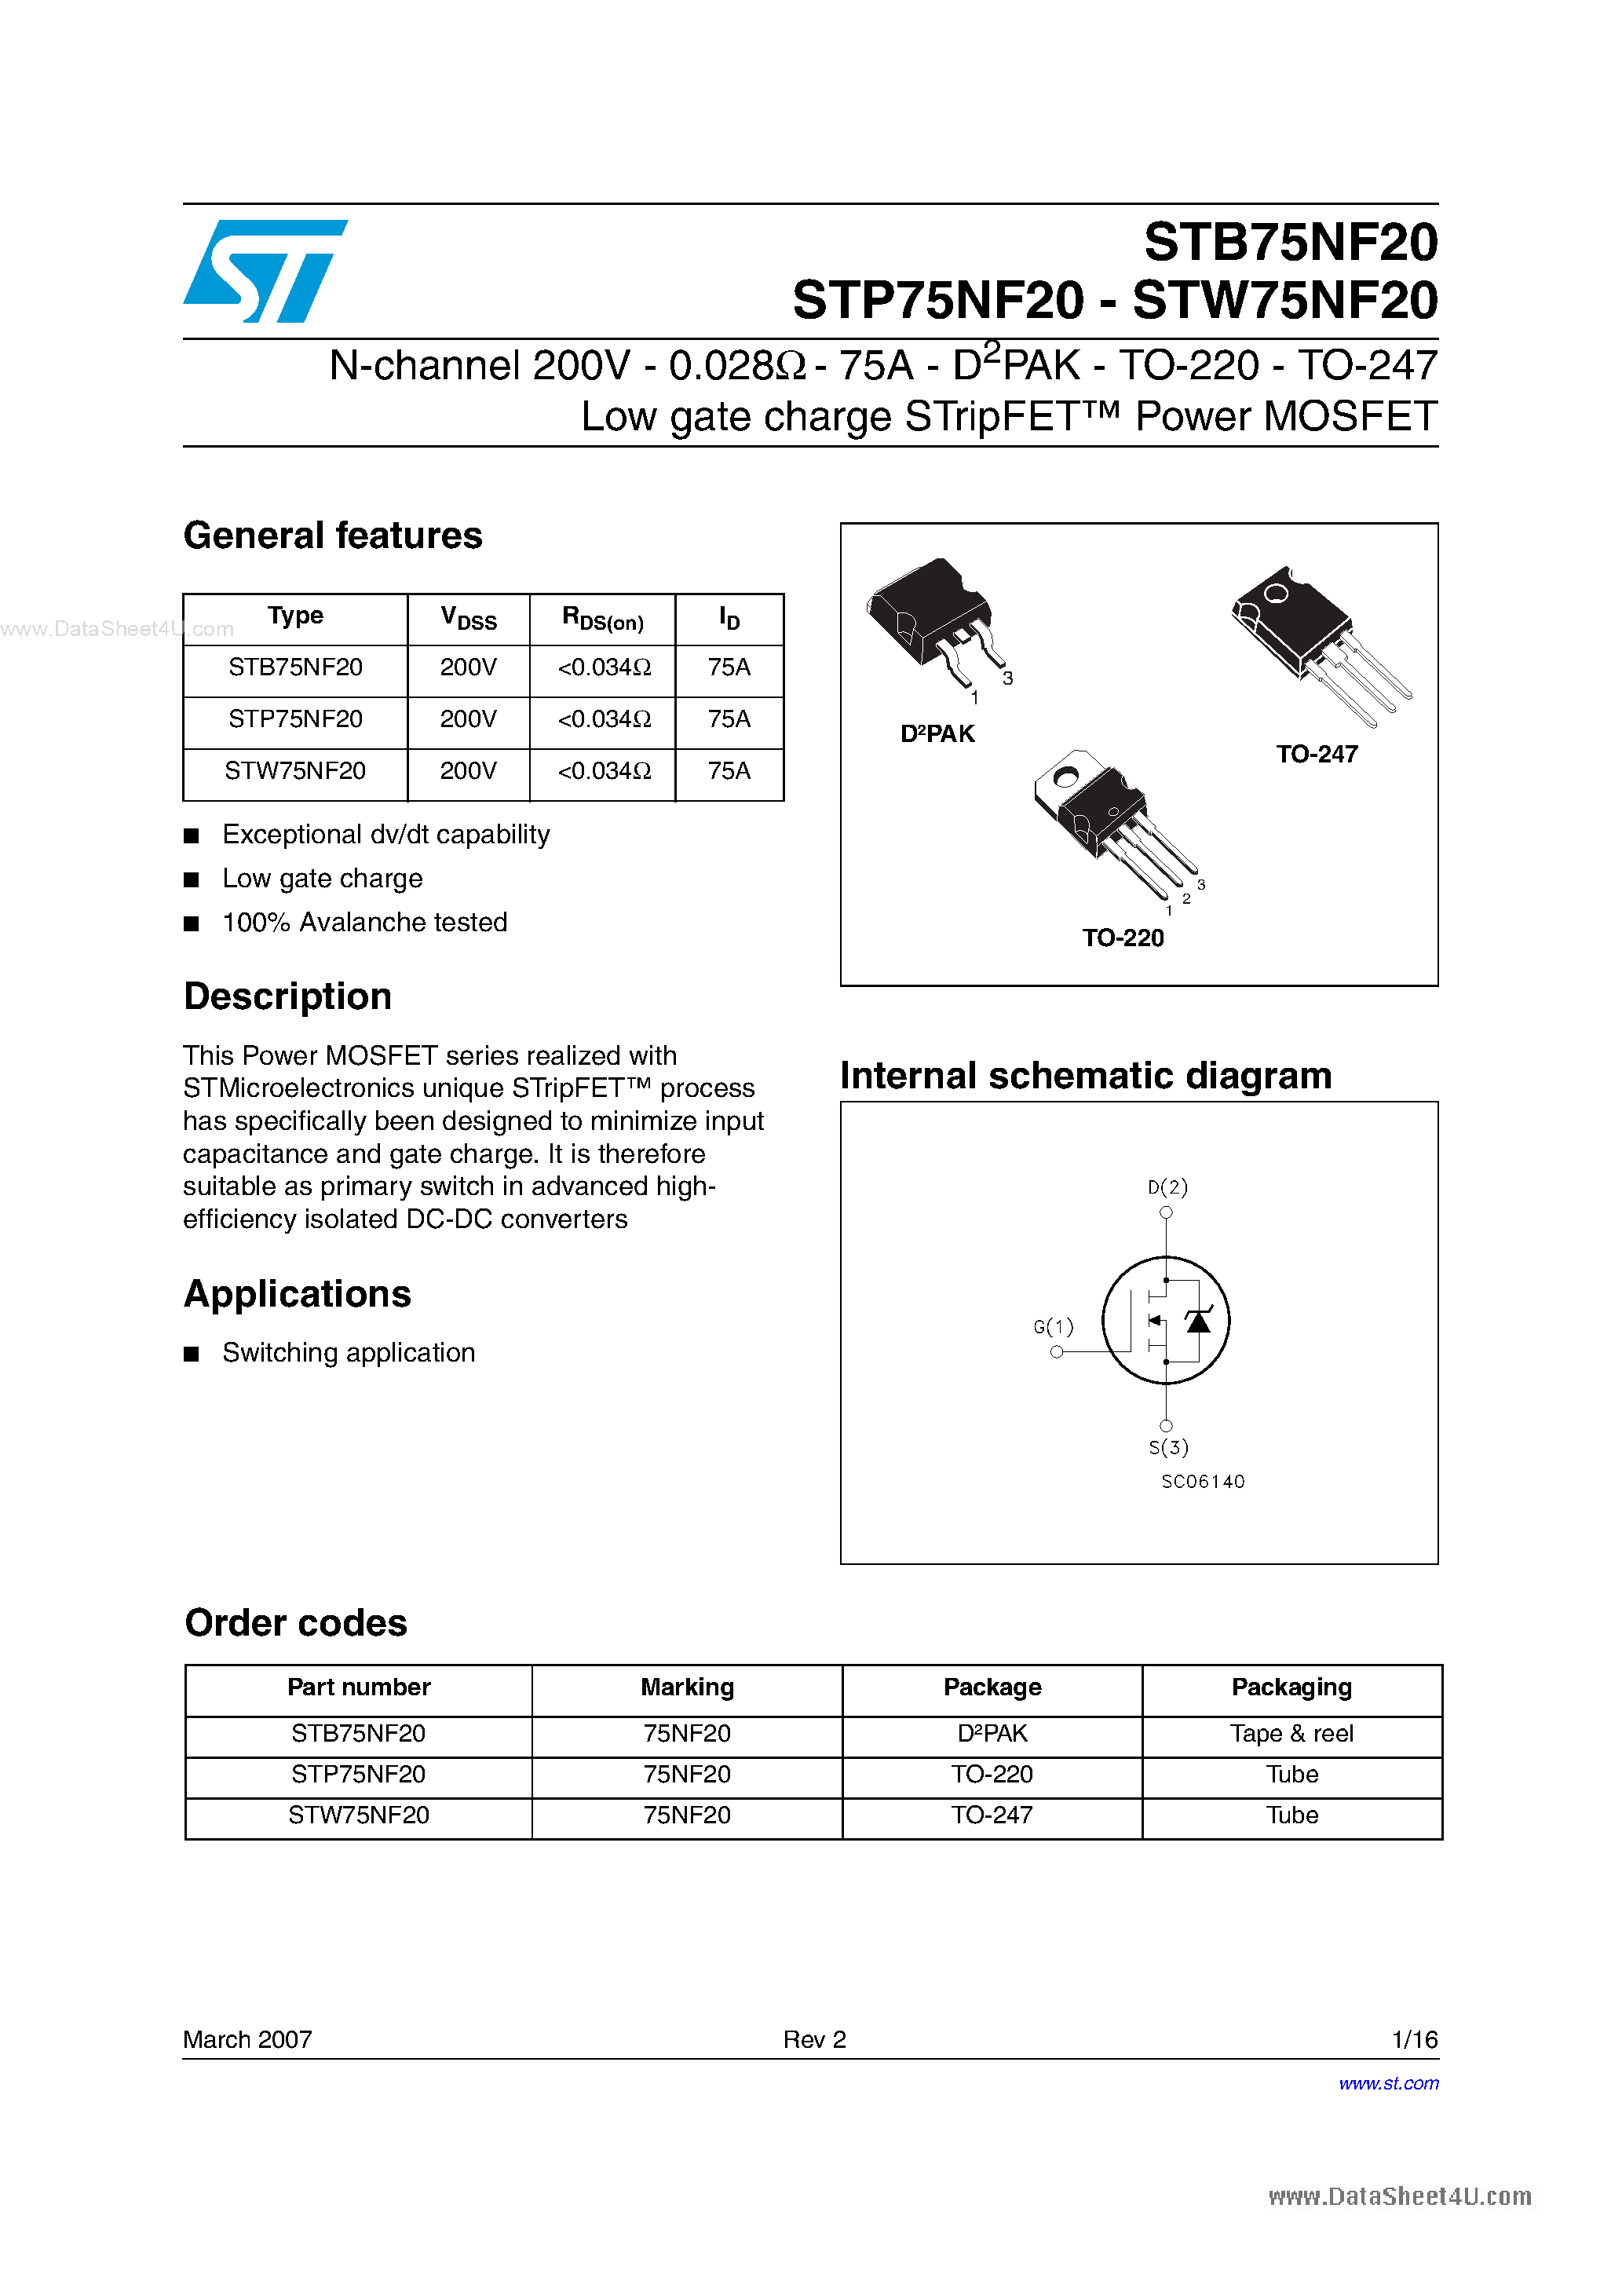 Datasheet STB75NF20 - N-channel Power MOSFET page 1